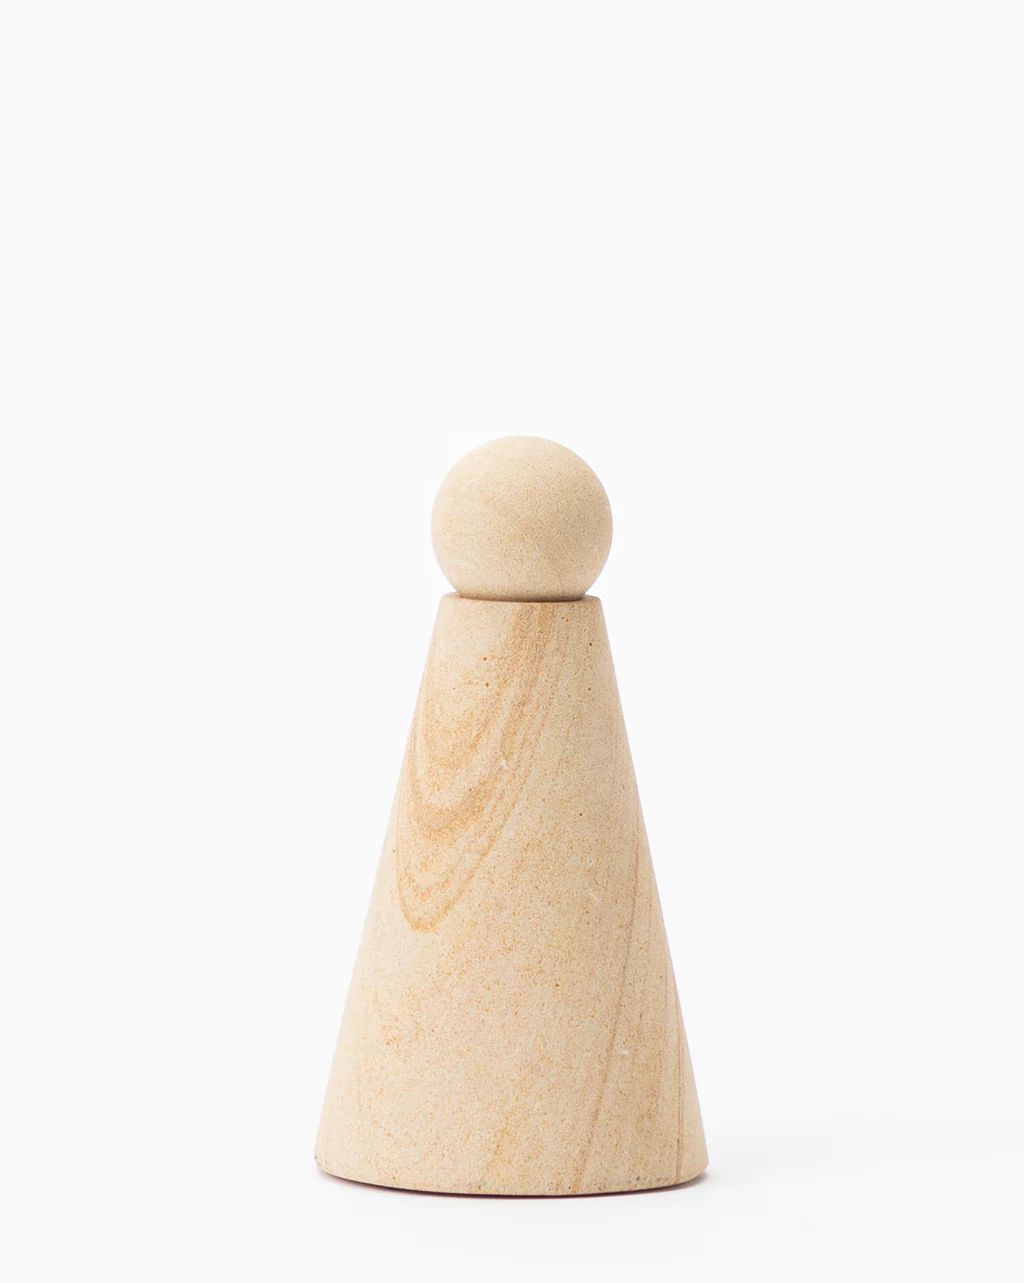 Sandstone Stacked Object | McGee & Co.